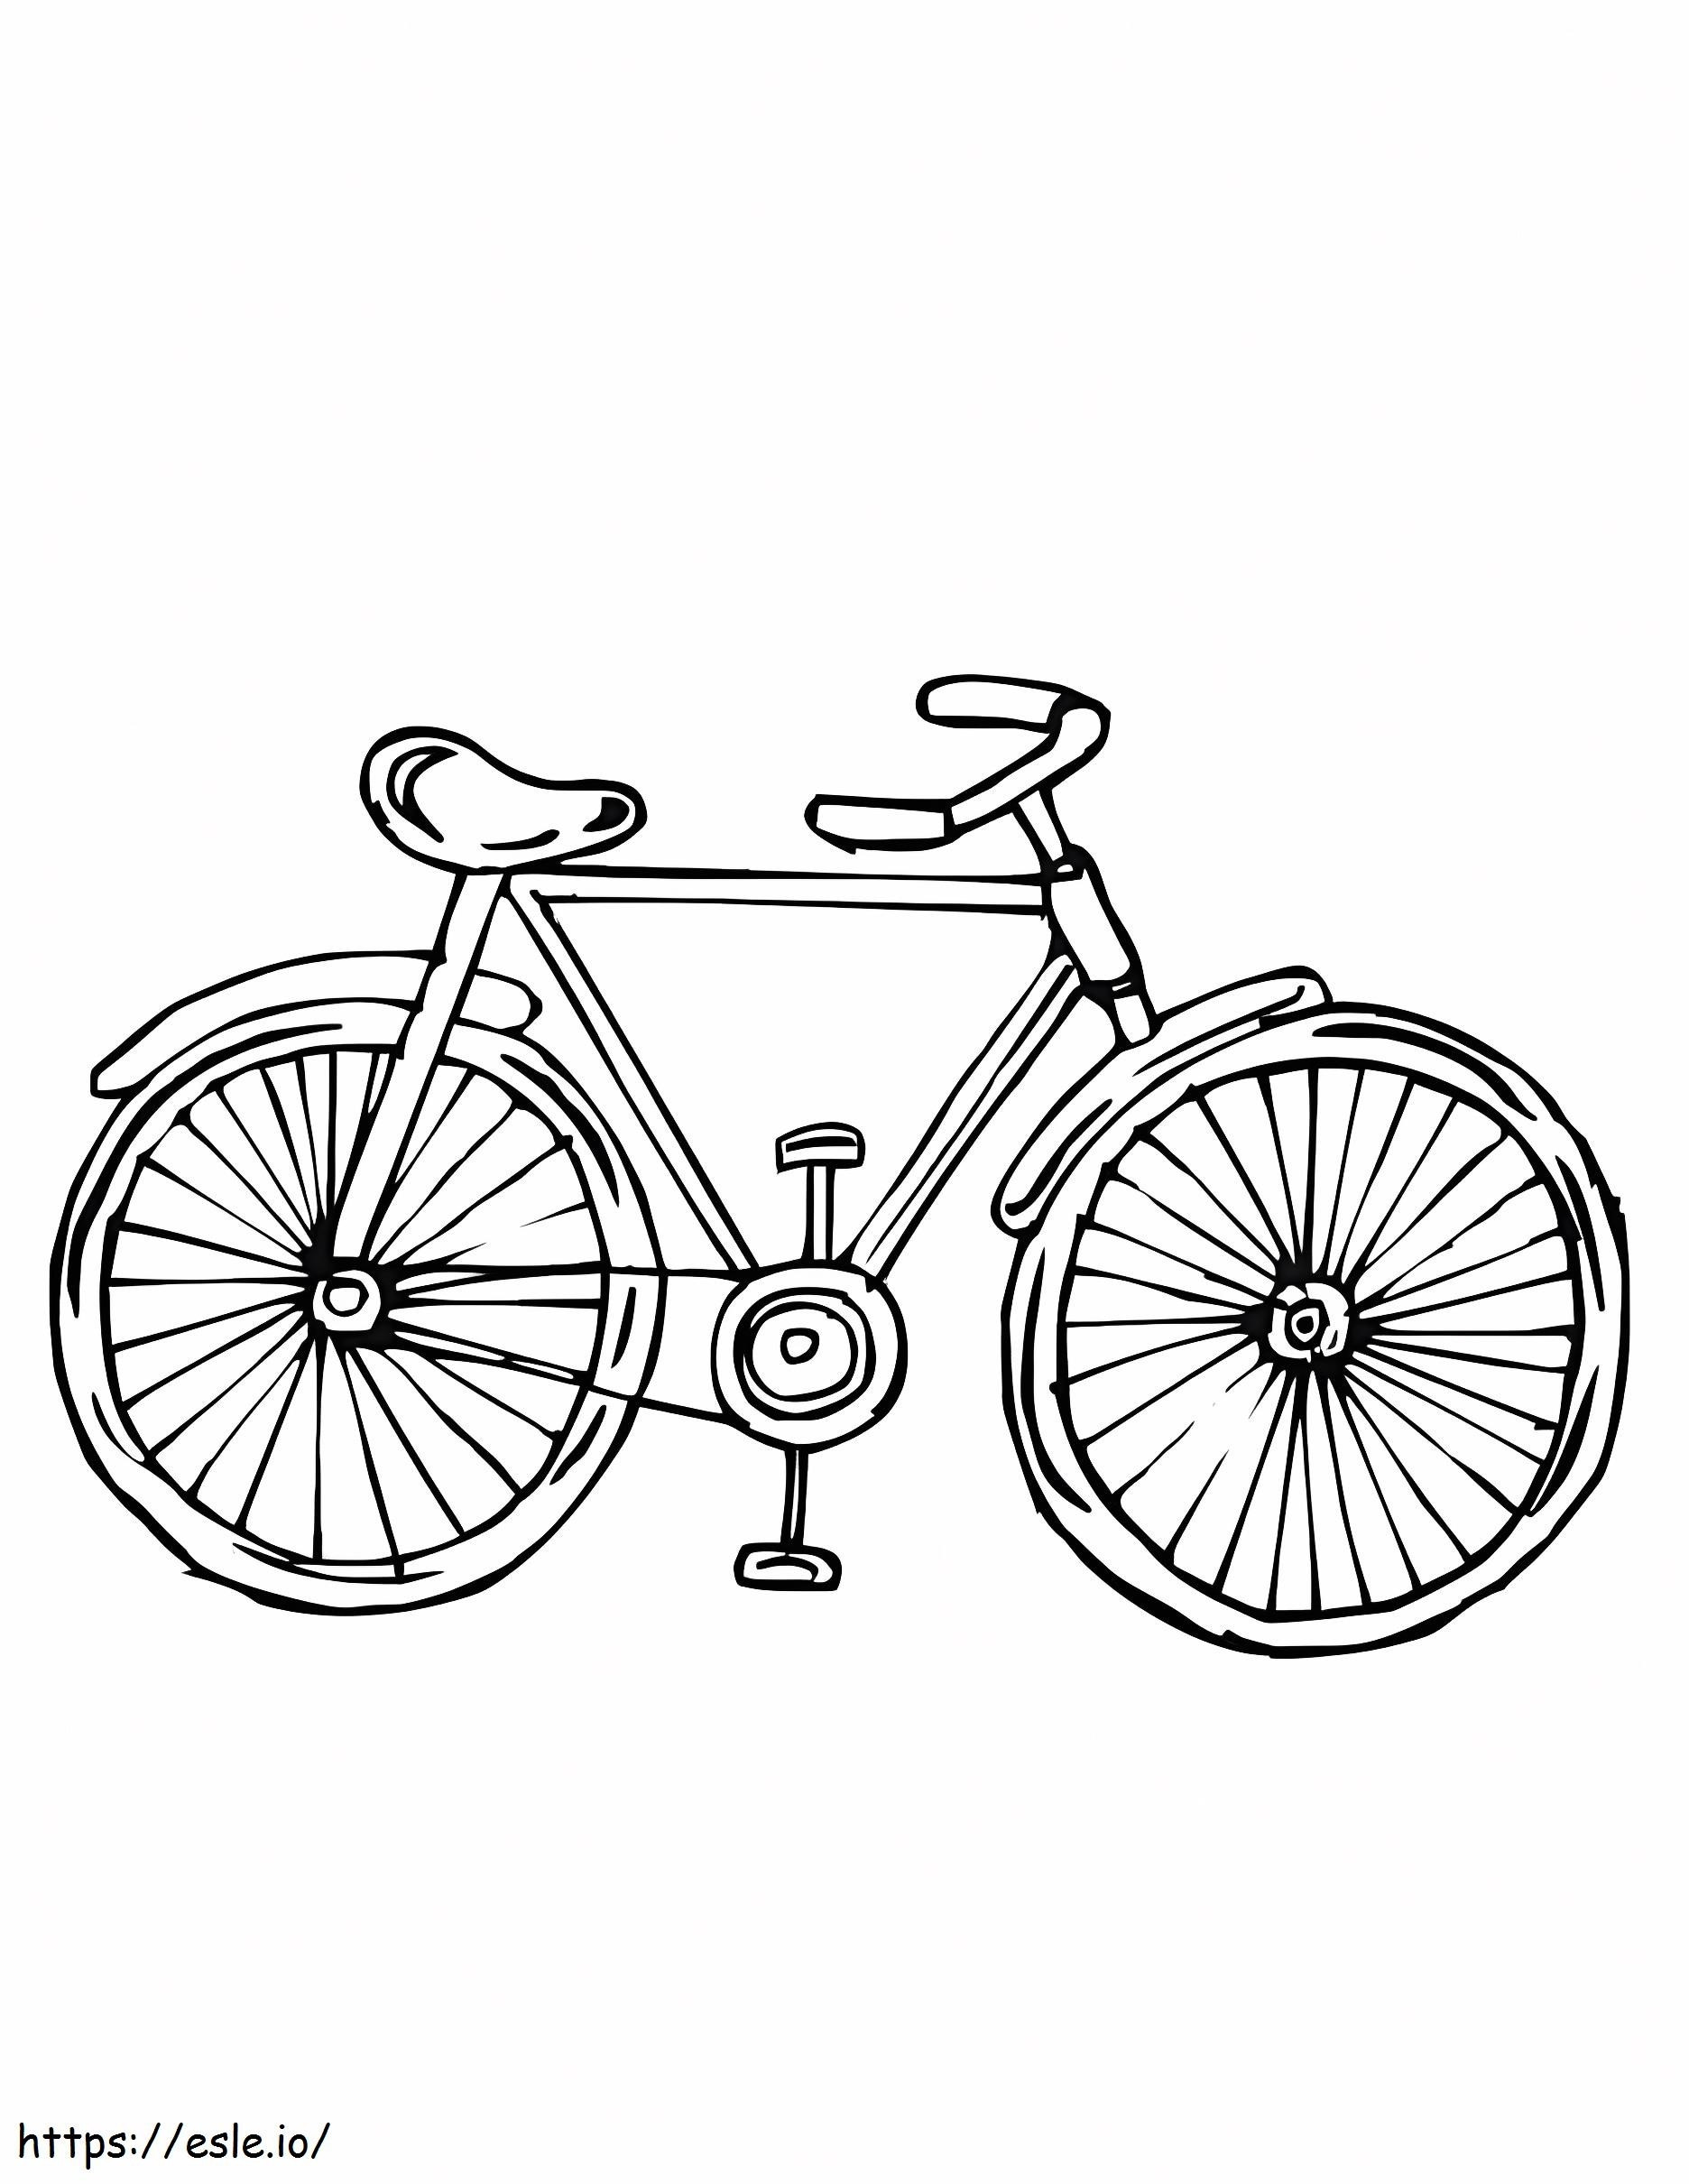 Label The Parts Of A Bicycle coloring page